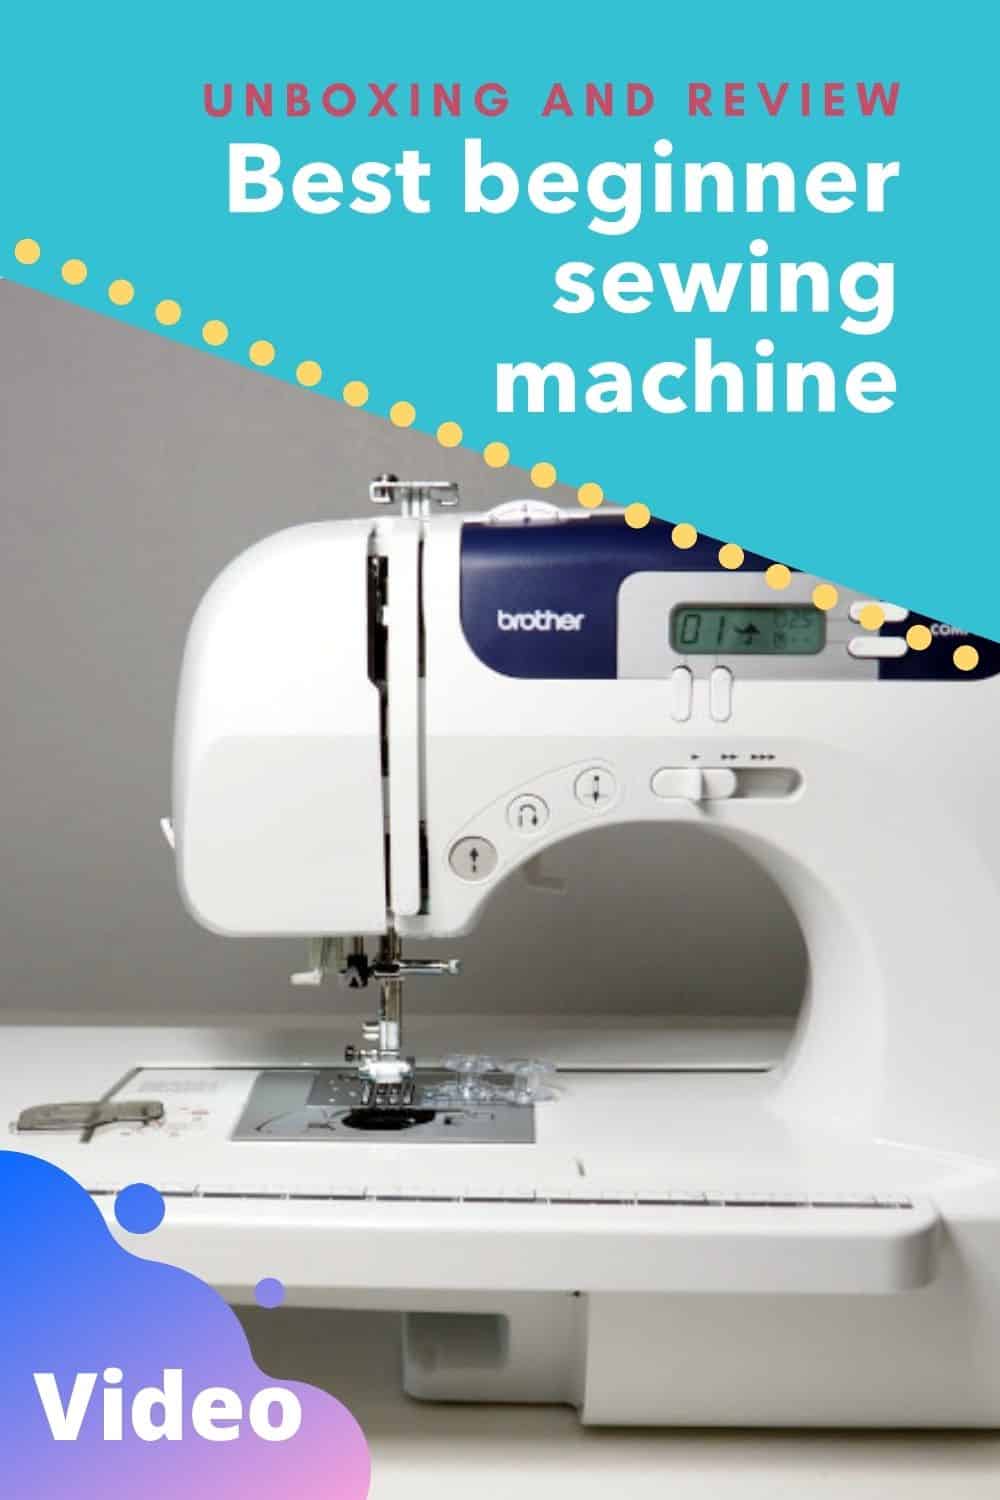 Video review of the Brother CS6000i sewing machine. Image of the machine with title.